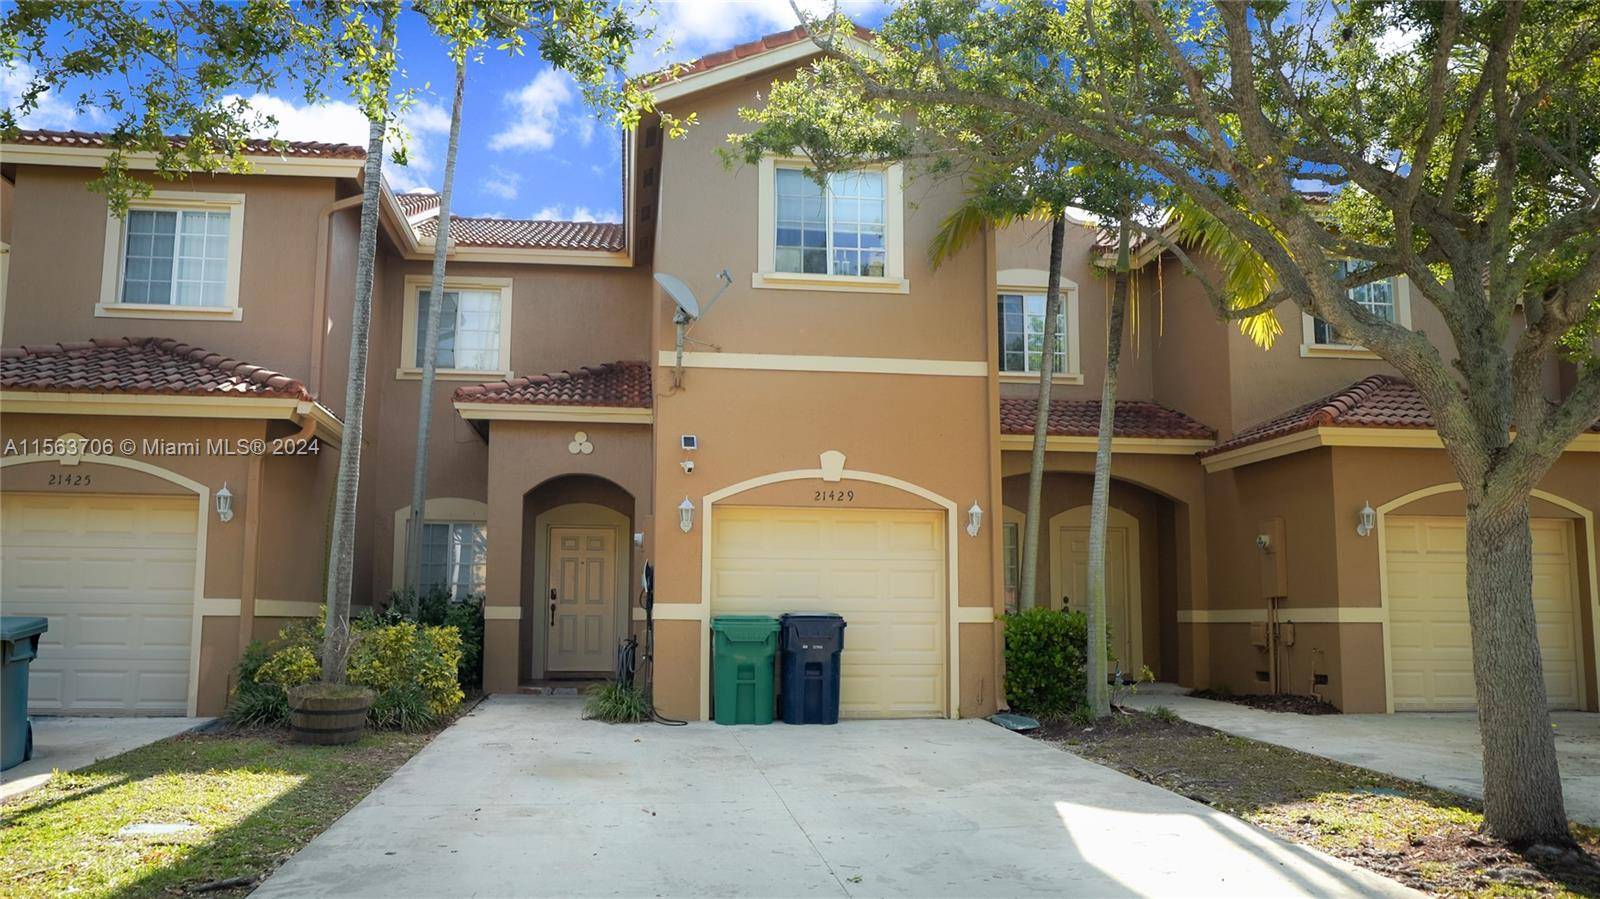 Welcome to this charming townhouse in Santa Barbara community in Cutler Bay that offers a perfect blend of comfort and convenience.